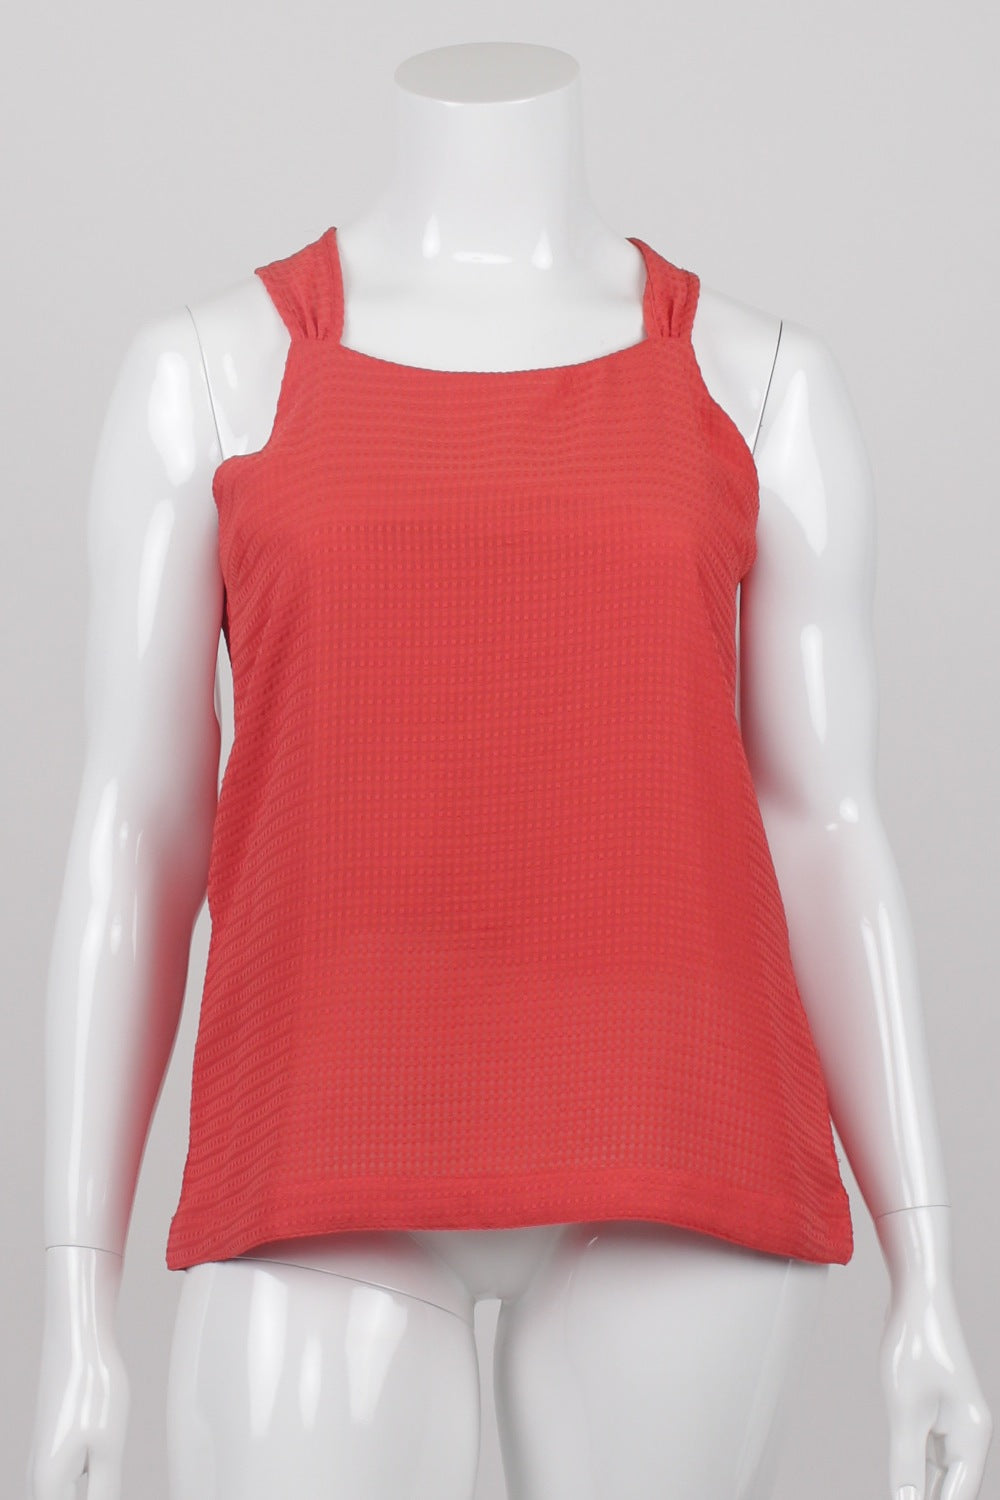 Jeanswest Red Textured Sleeveless Top 14